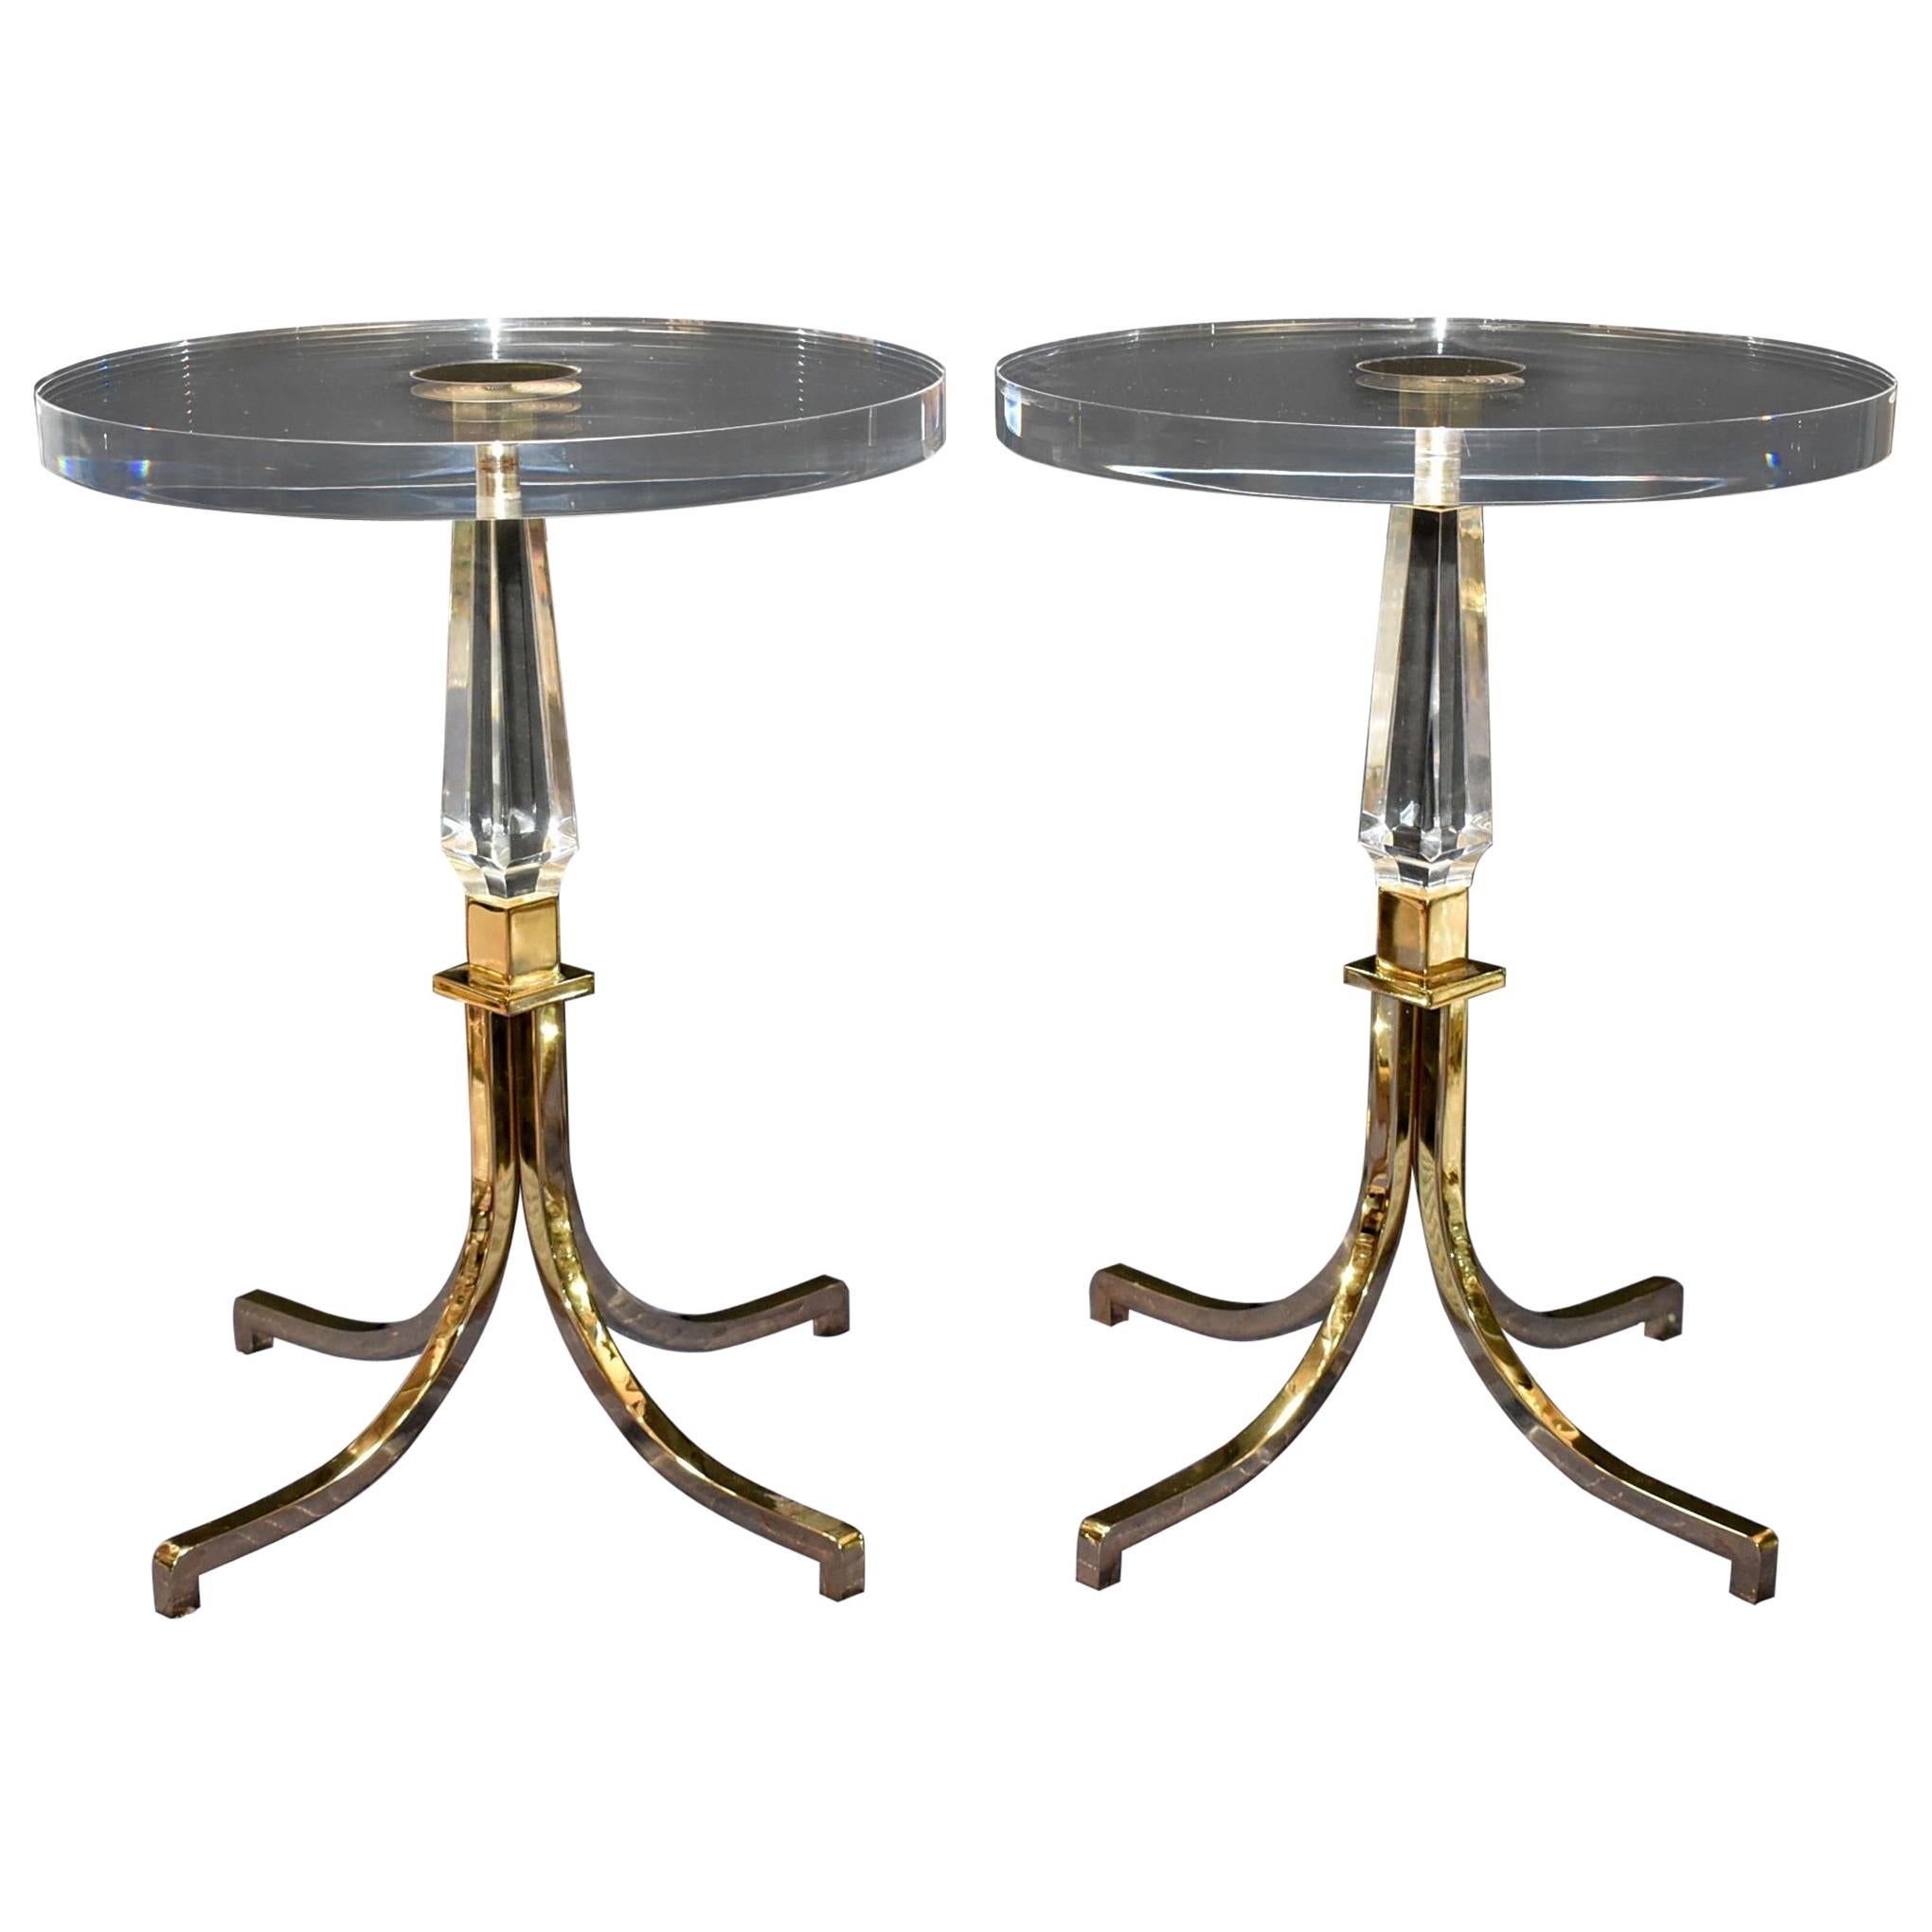 Pair of Regency Style Lucite and Brass Side Tables by Charles Hollis Jones For Sale